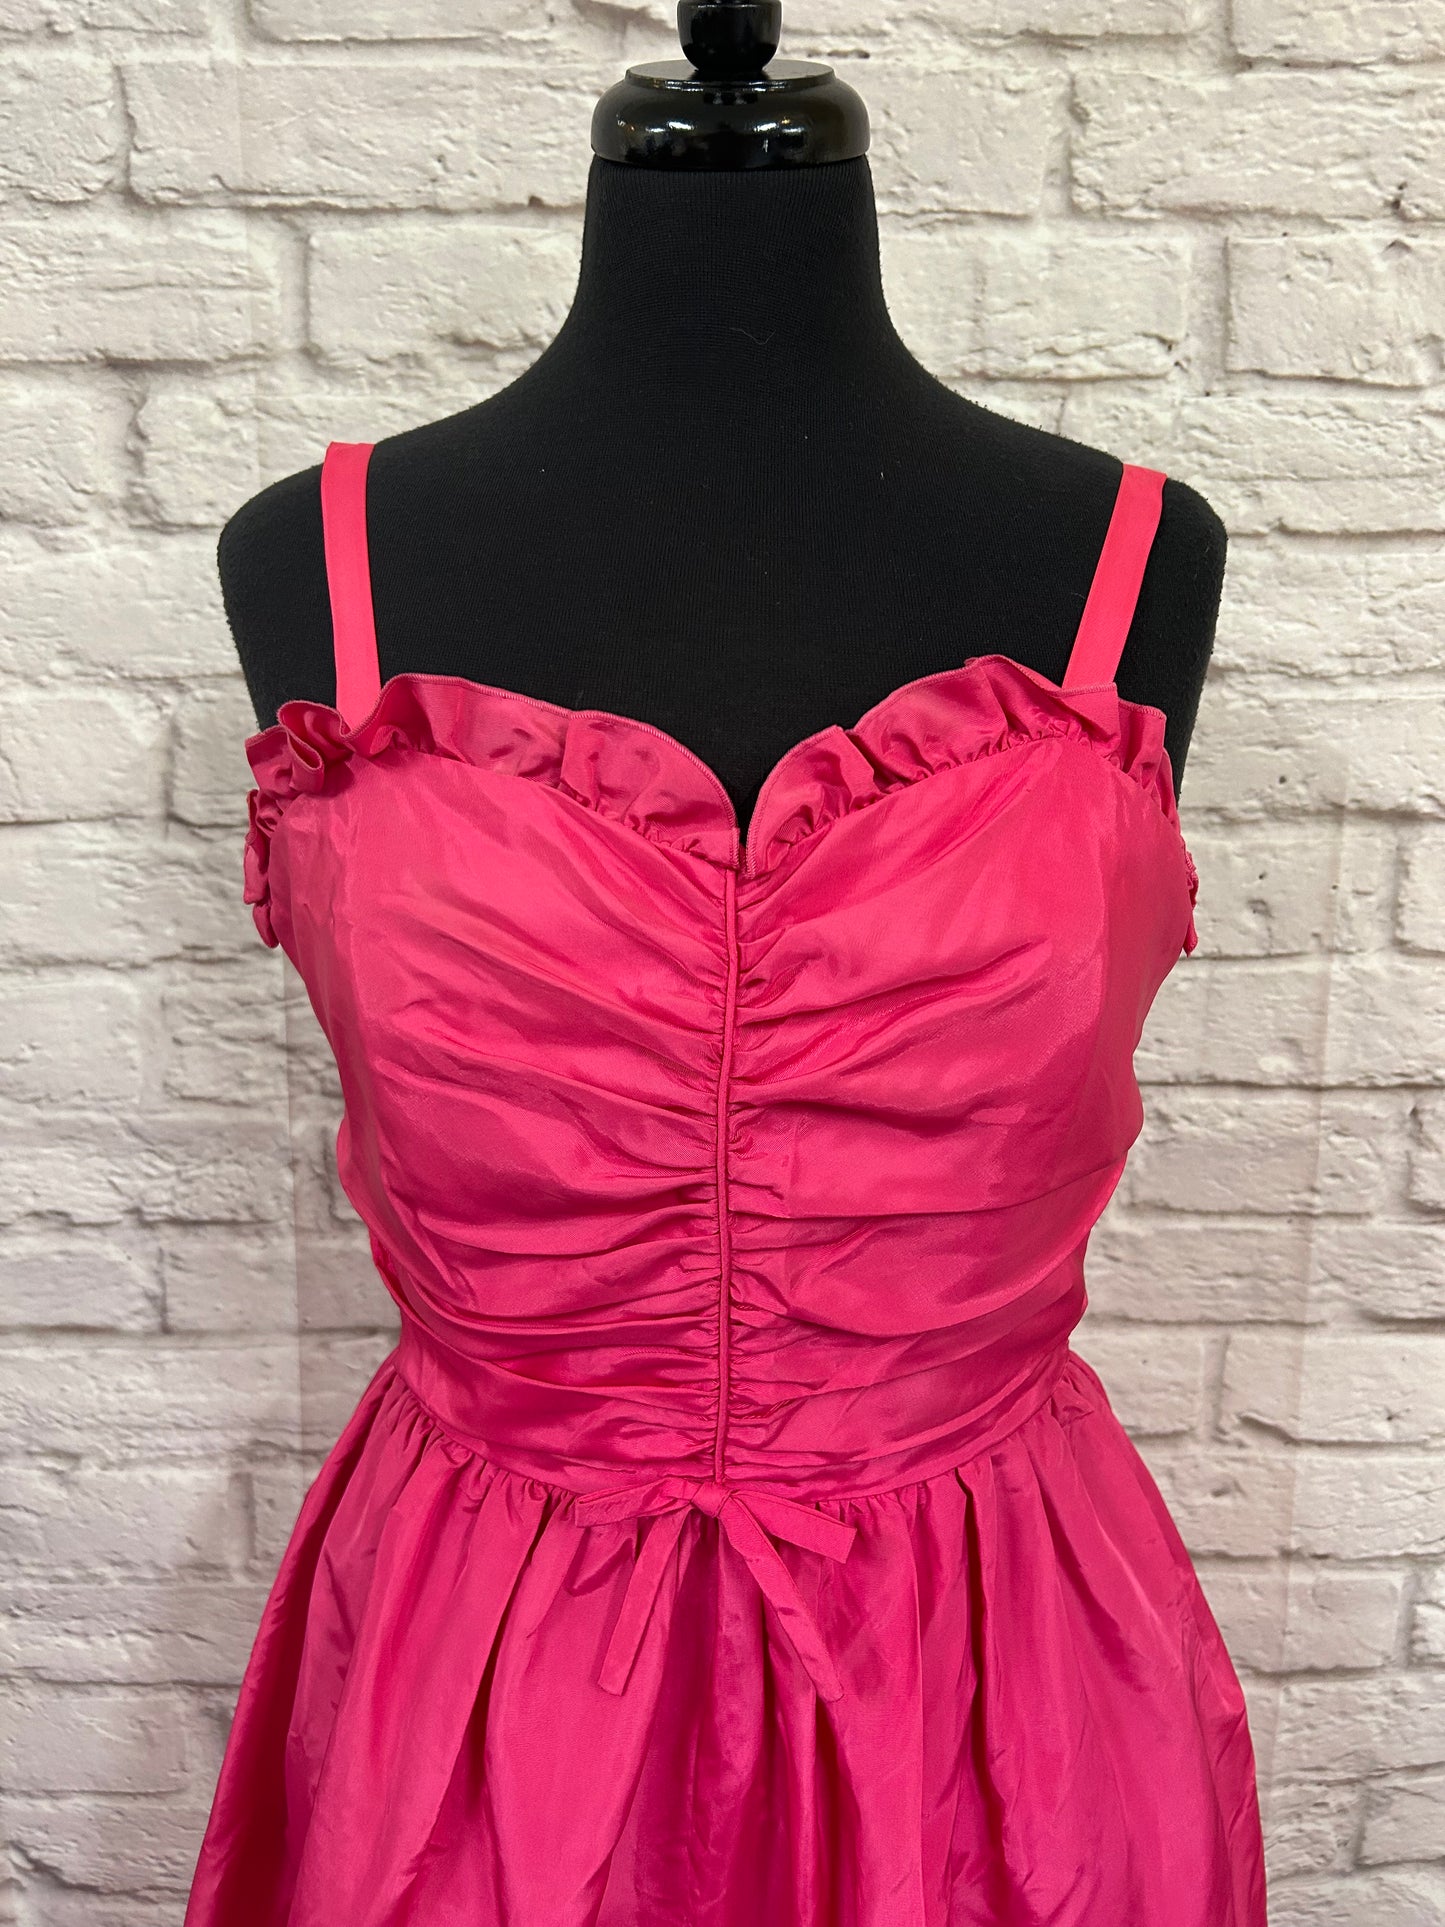 1980s Fuscia Pink Netted Party Dress Size 8-10